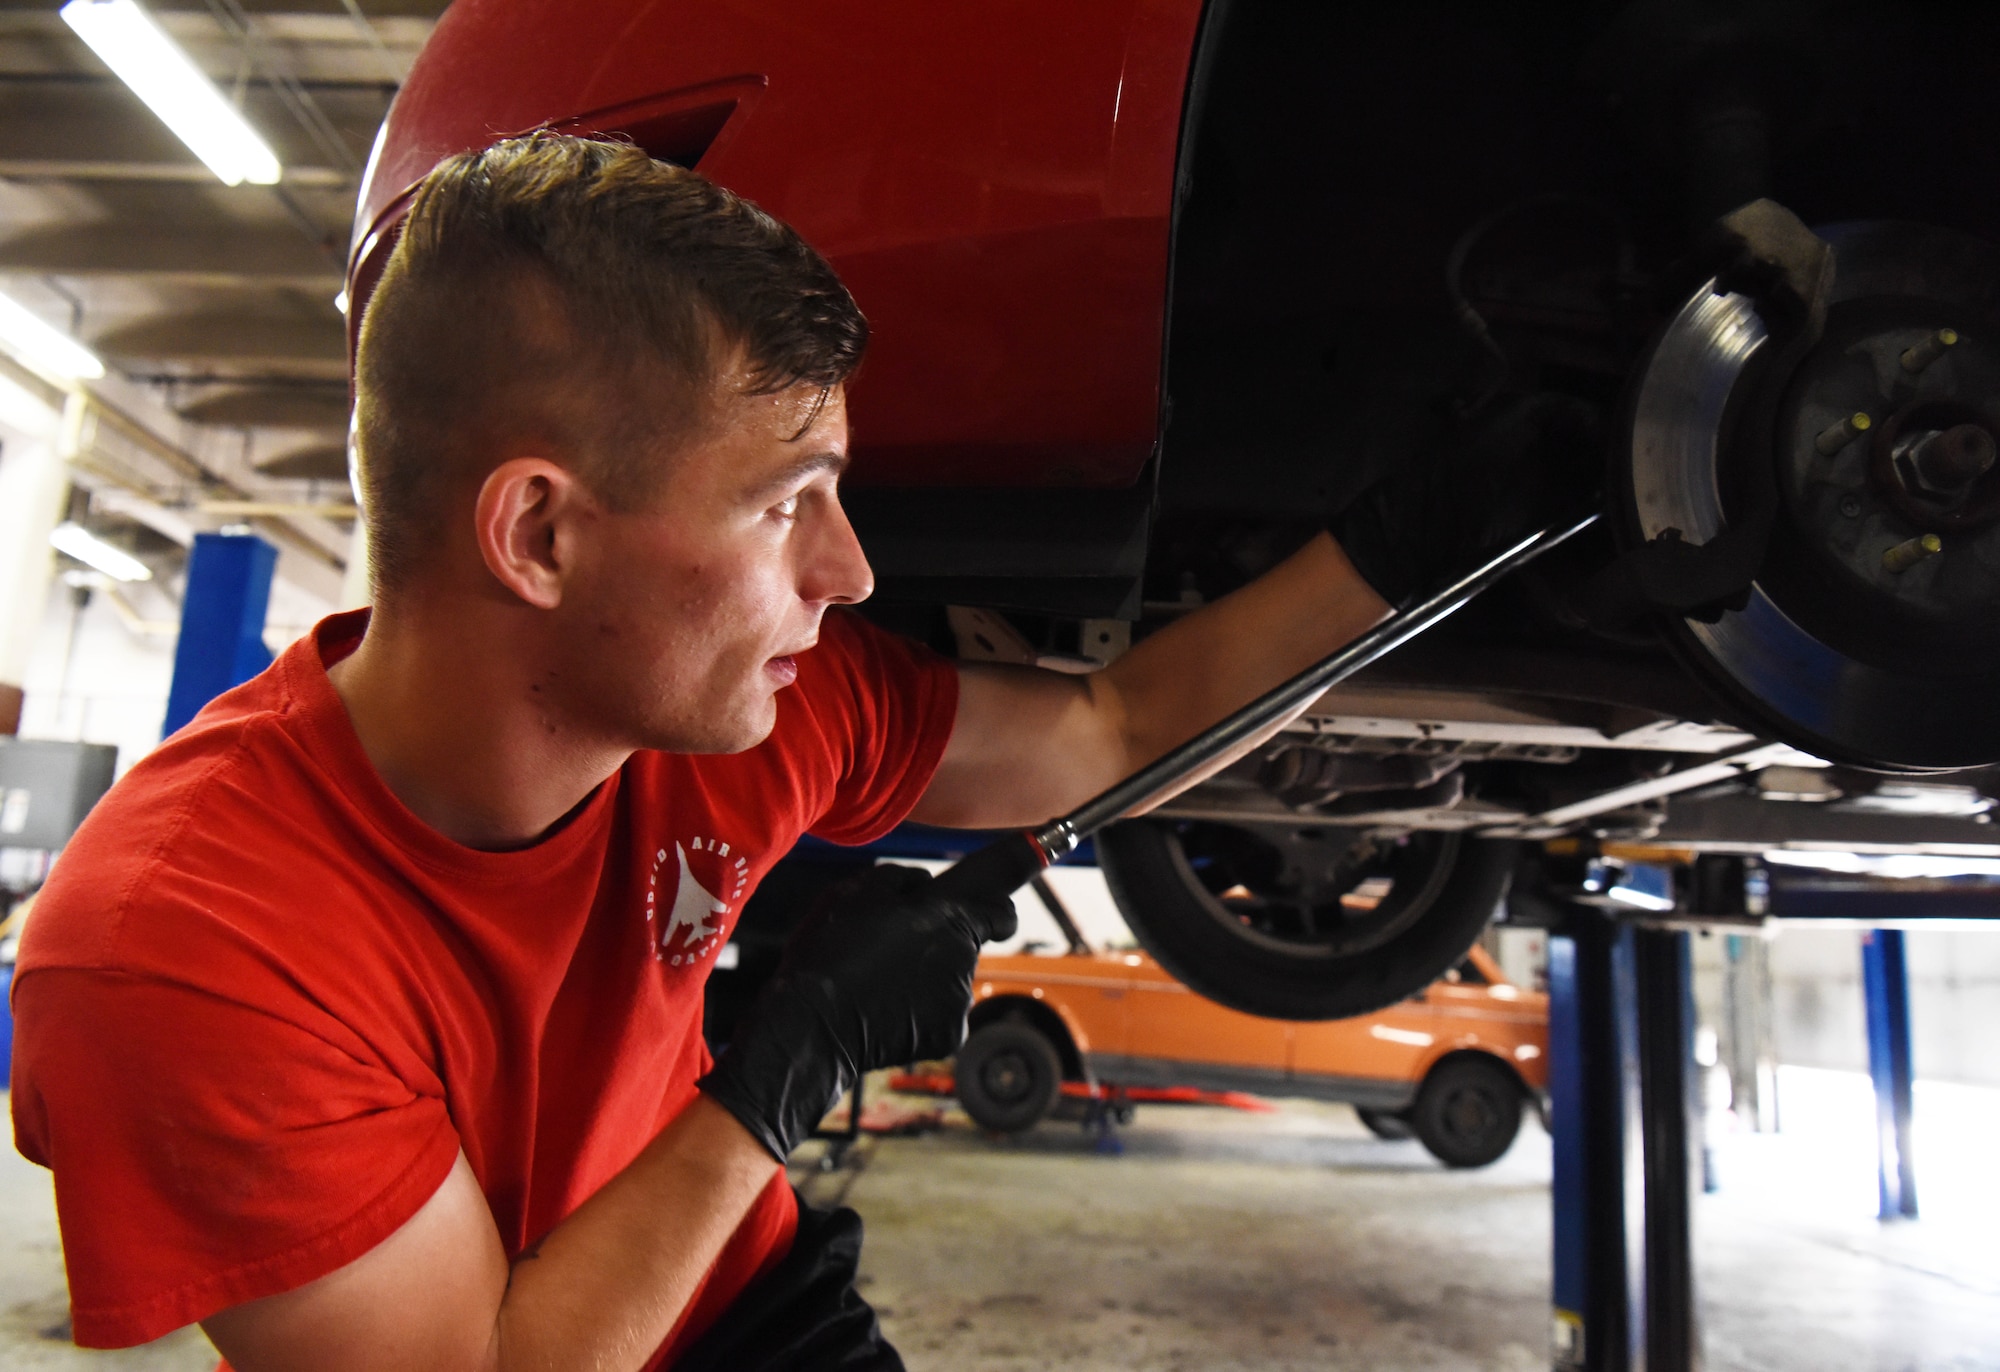 Senior Airman Chance Young, a 28th Maintenance Group squadron load crew member, replaces brakes in the auto hobby shop at Ellsworth Air Force Base, S.D., Aug. 15, 2018. The mechanics at the hobby shop are here to help Airmen and their families with their automotive repair needs and to help car enthusiasts with their projects. (U.S. Air Force Photo by Airman 1st Class Thomas Karol)